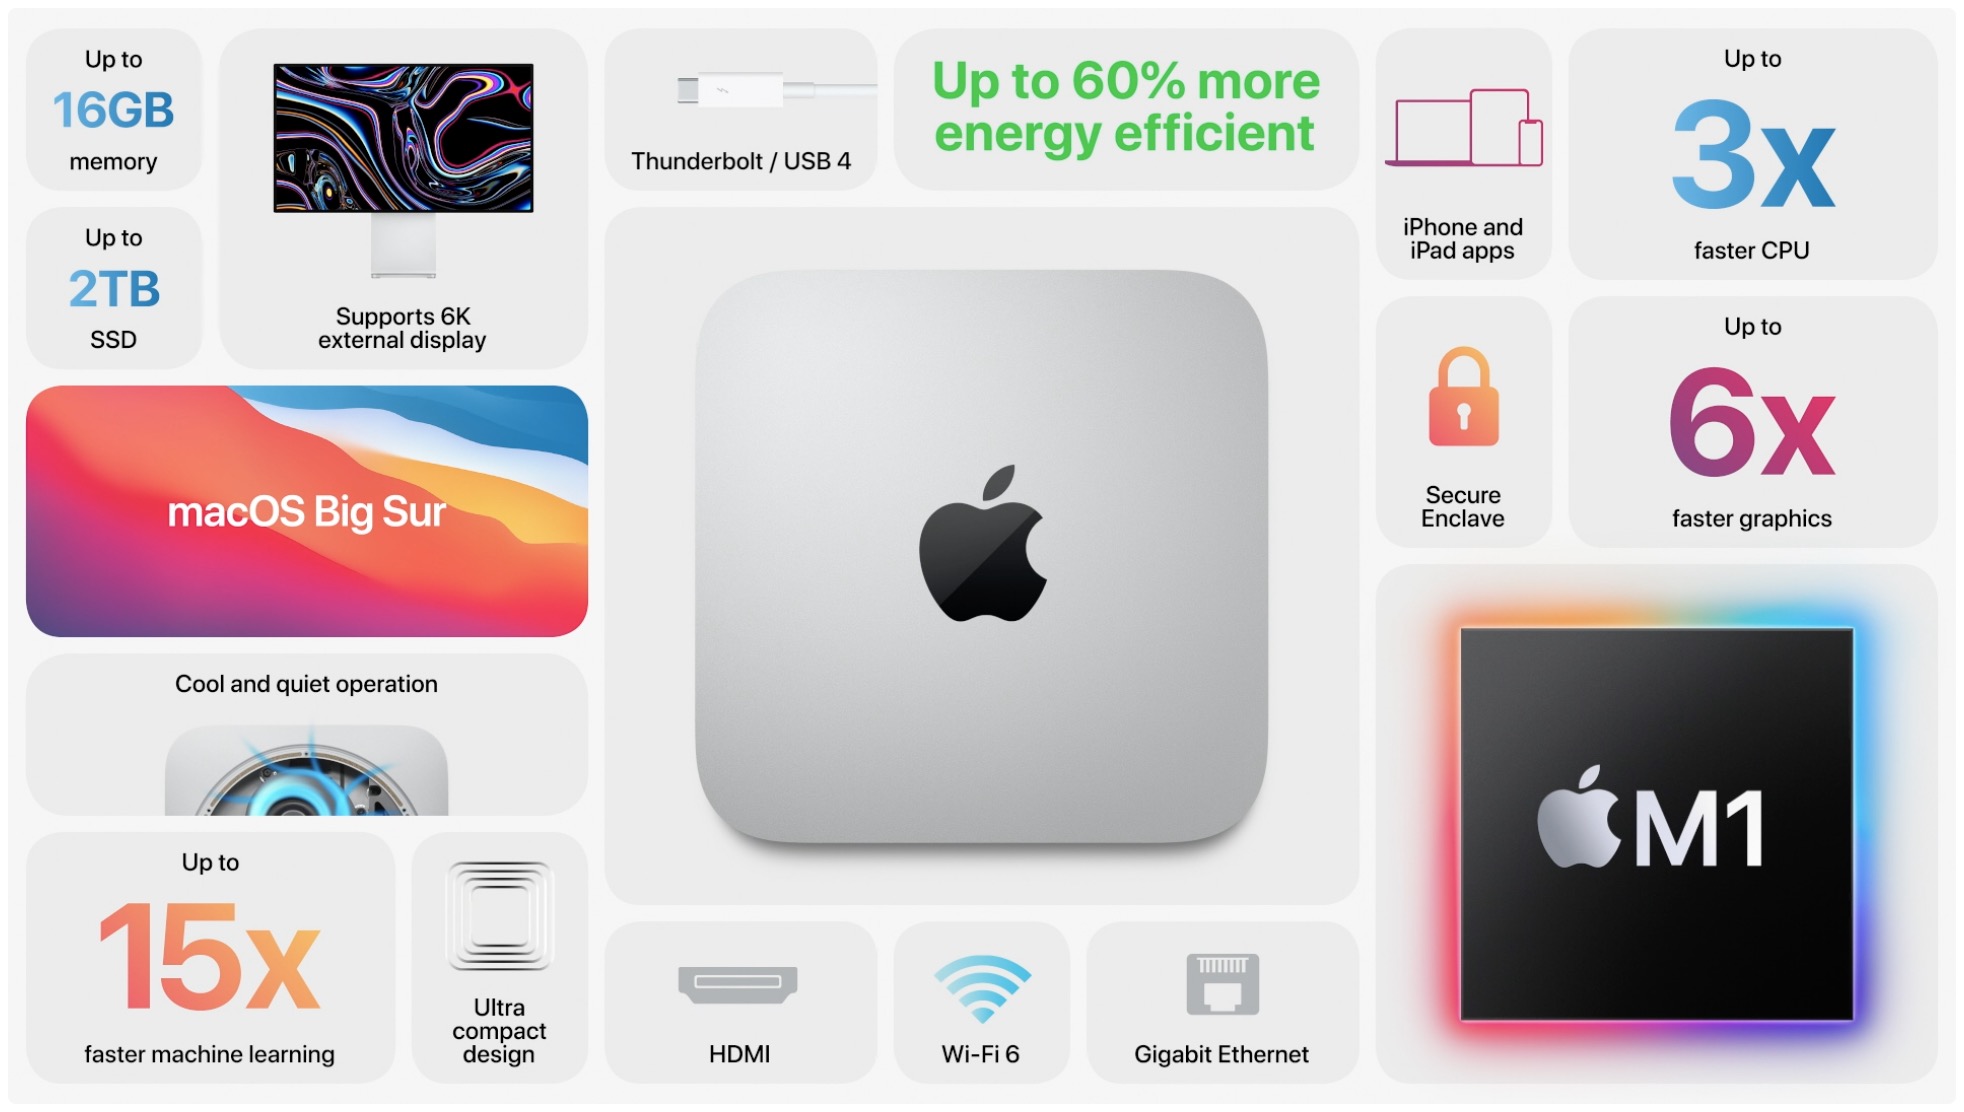 Marketing image showcasing the key features of Apple's M1-based Mac mini computer